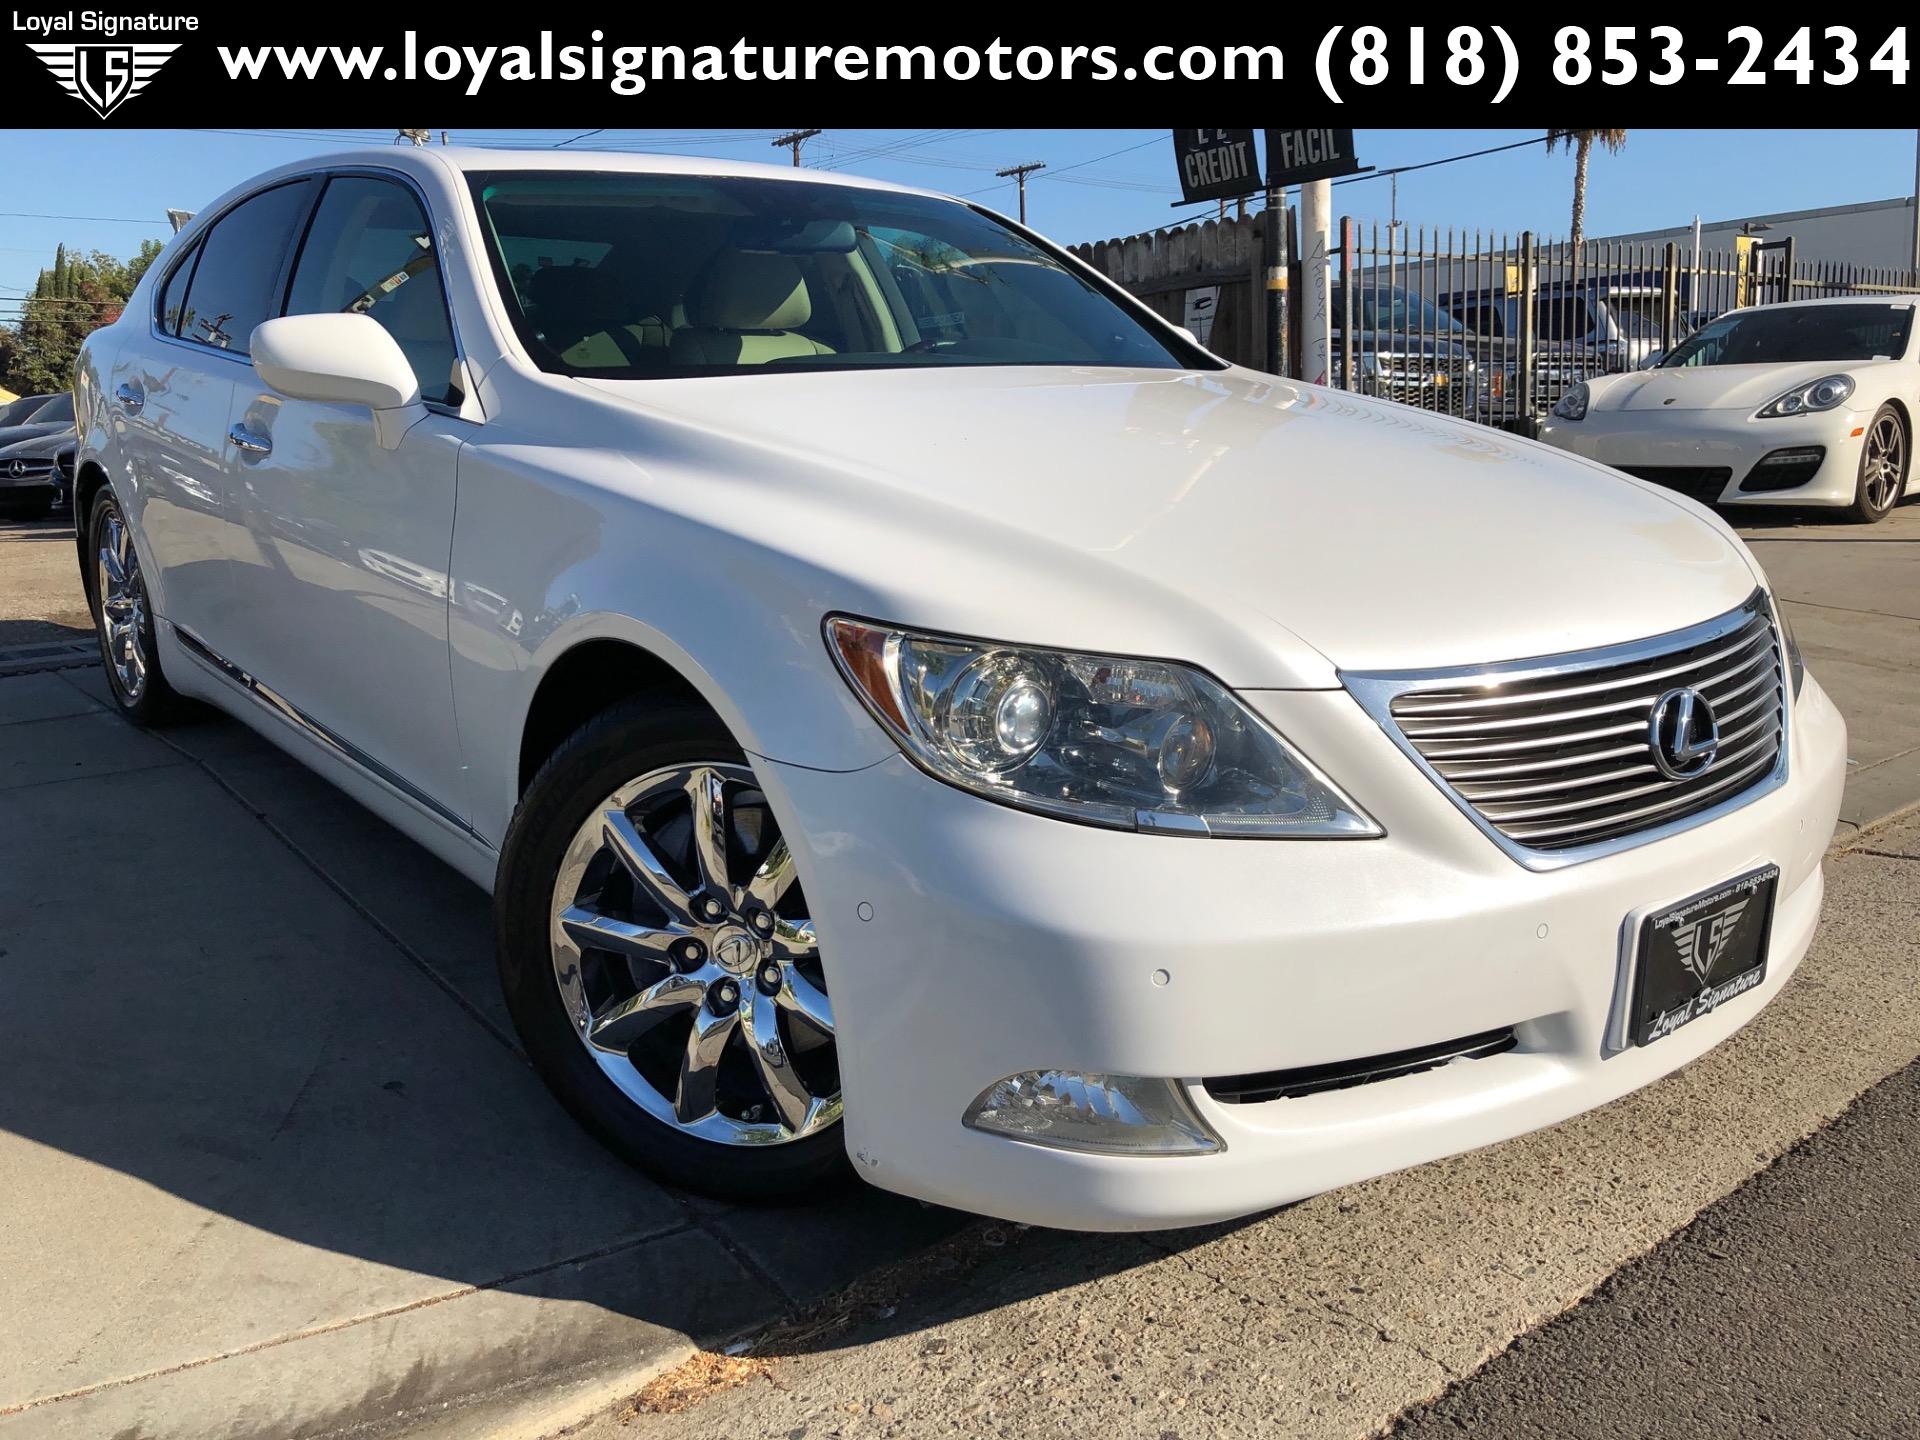 Used 2007 Lexus LS 460 For Sale (11,995) Loyal